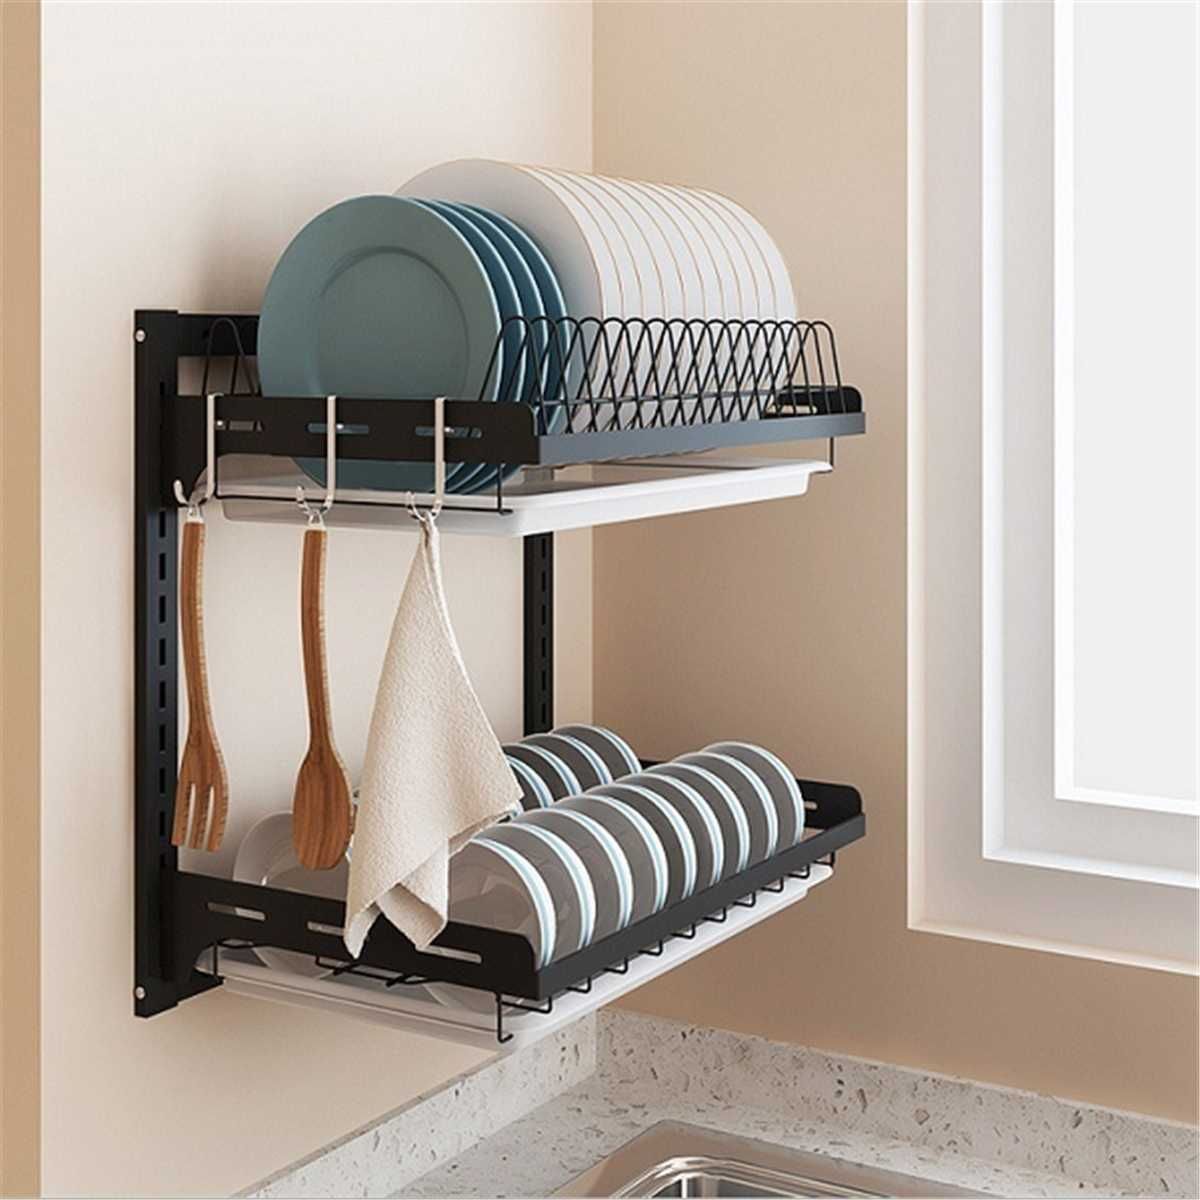 Stainless Steel Wall Mounted Dish Drainer Drying Rack Bowl Plate Storage  with Tray Kitchen Organizer Chopstick Holder Hanging